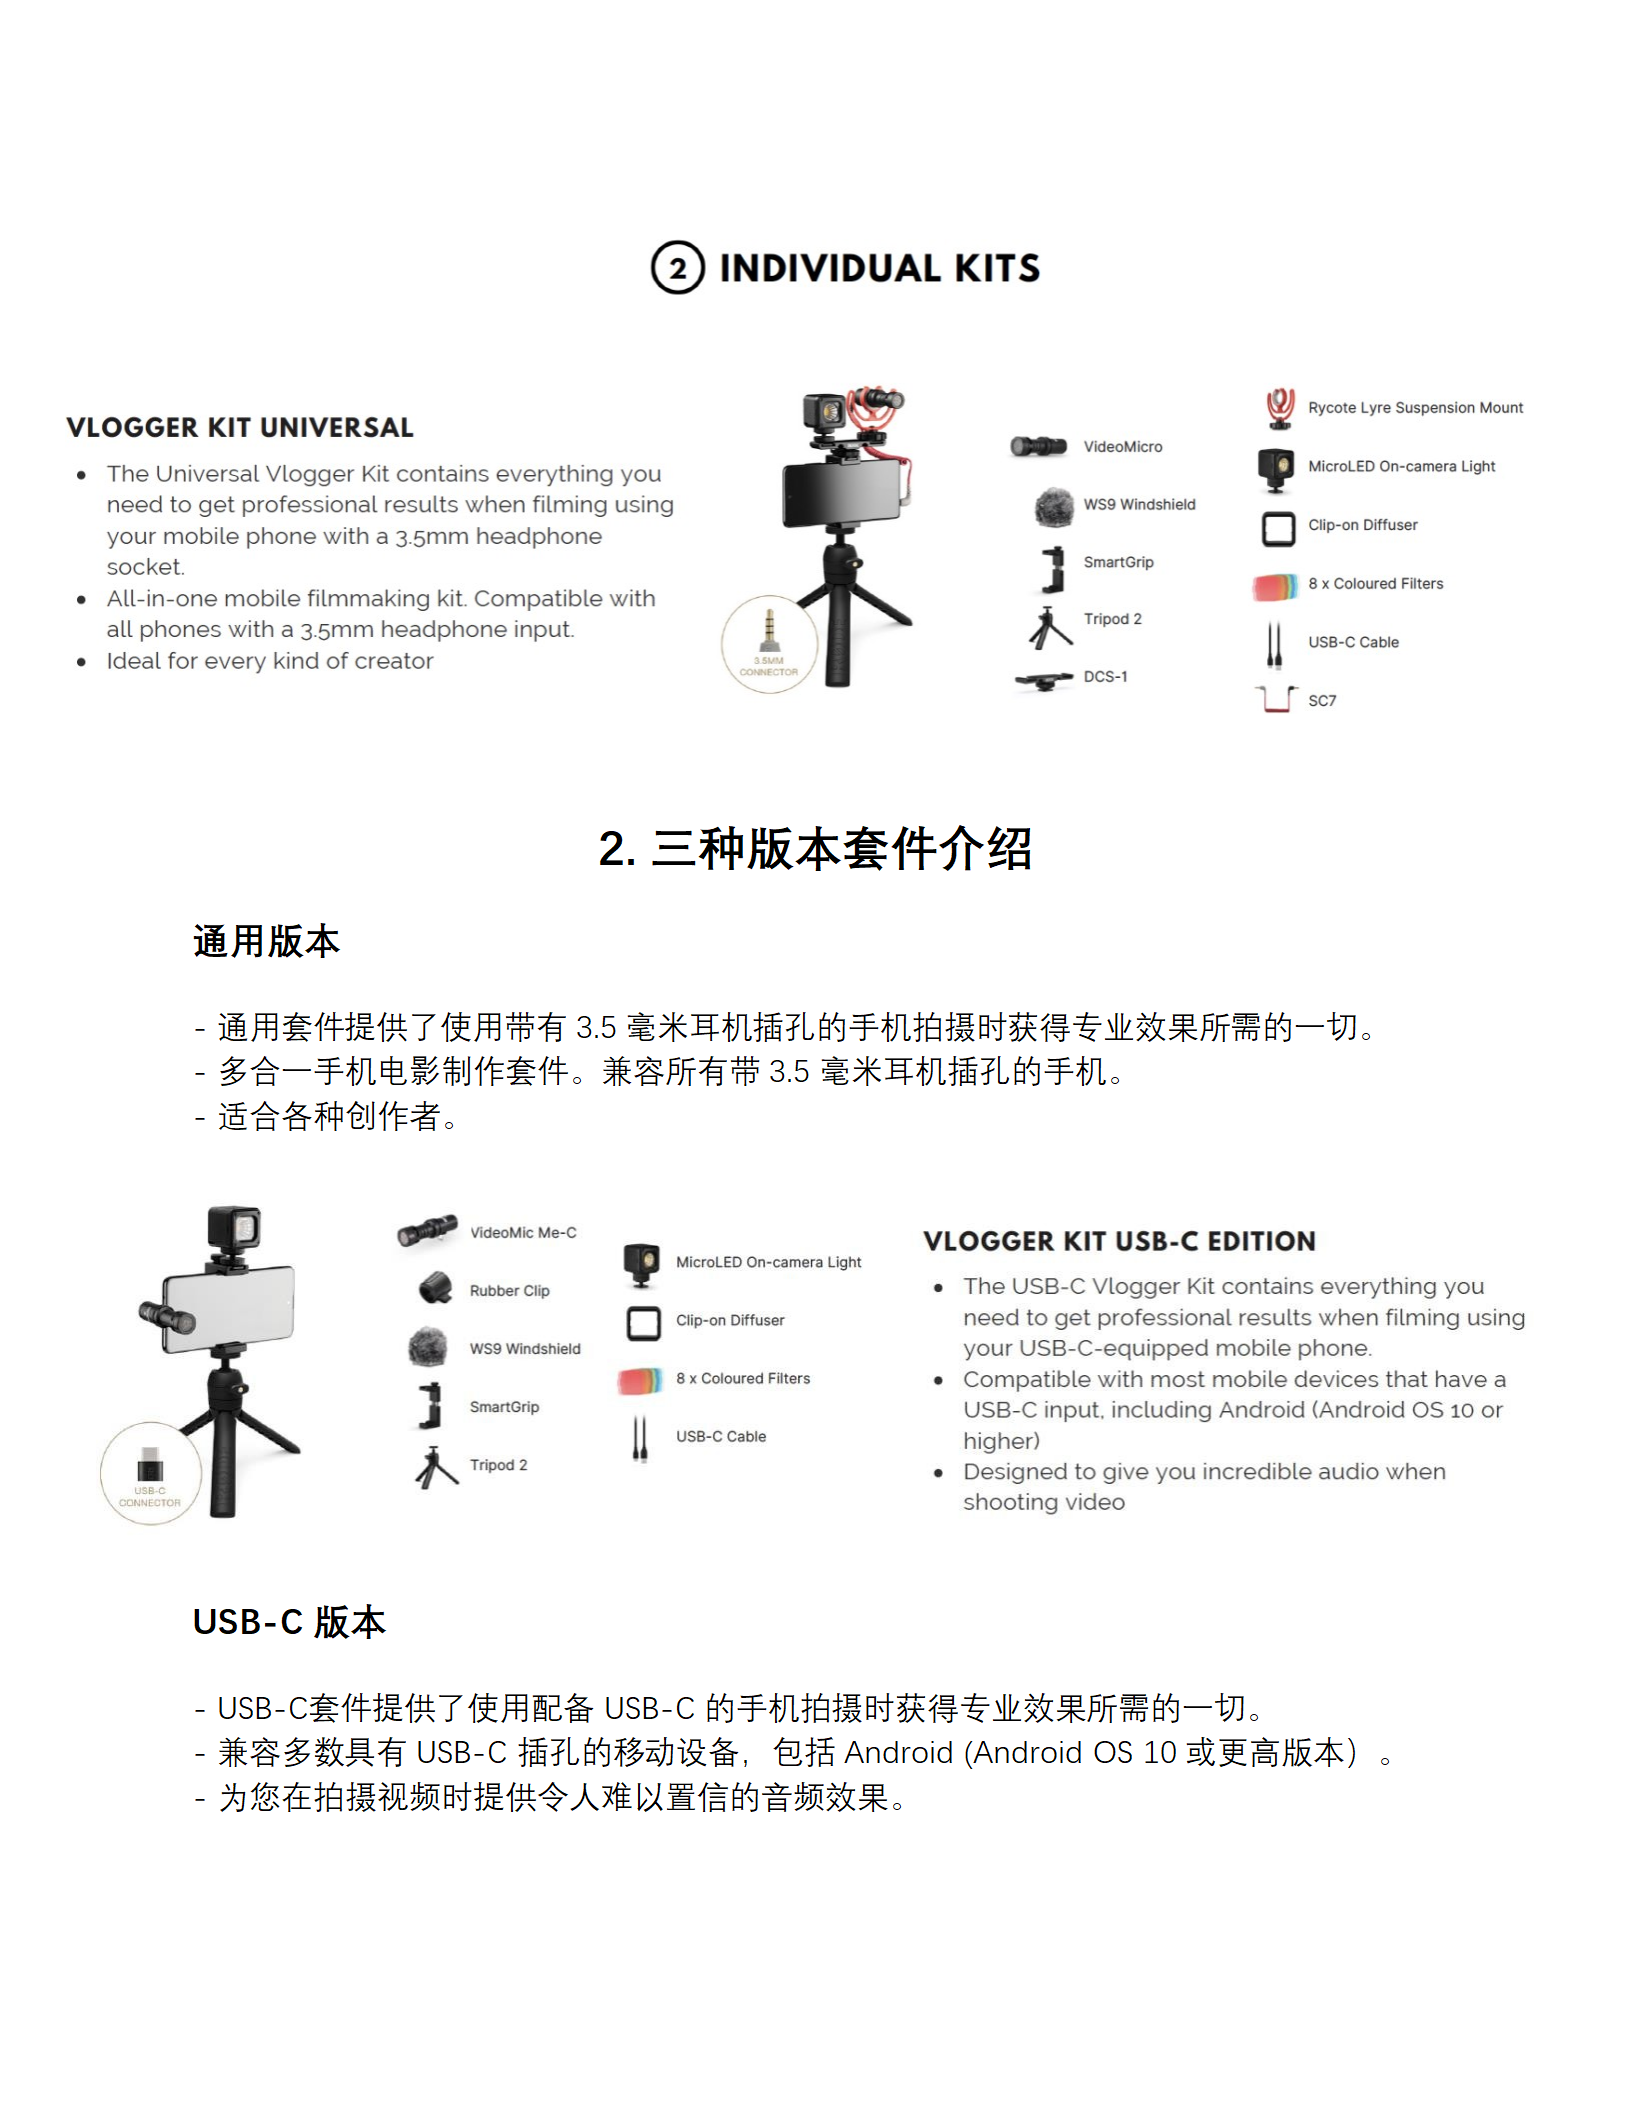 Vlogger Kit Feature Highlights and Explainer 中英_02.png